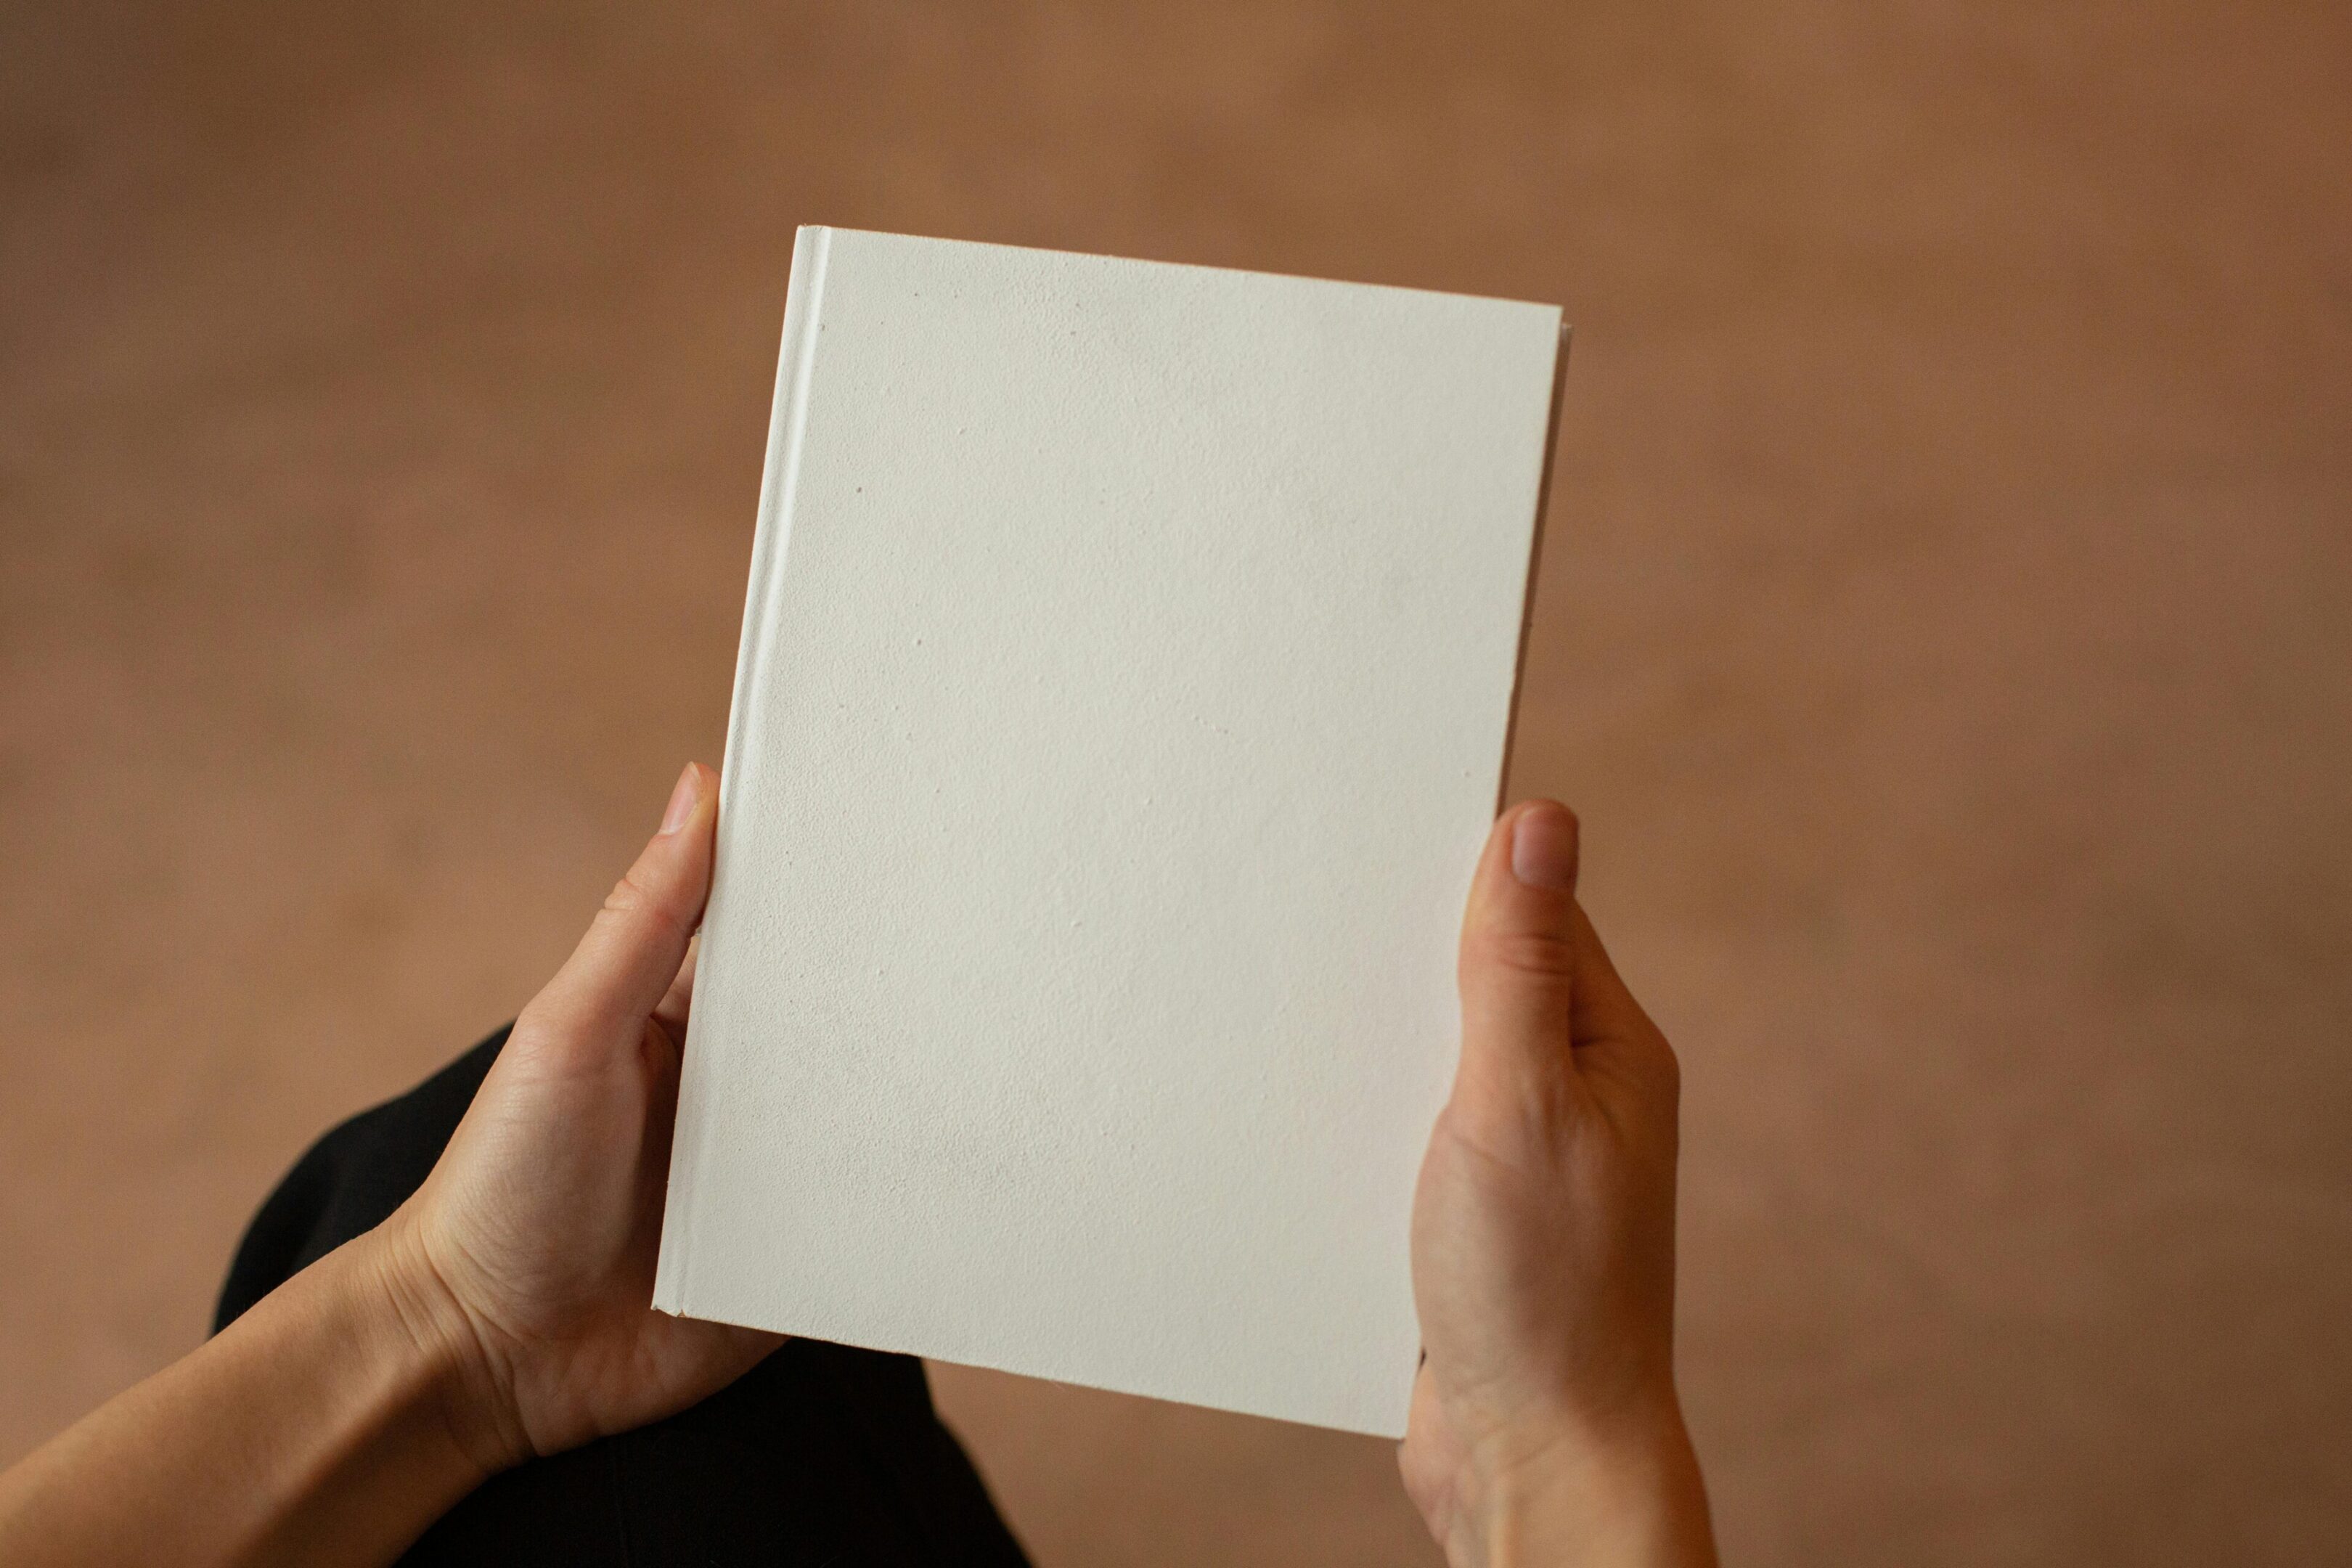 A person holding an empty book in their hands.